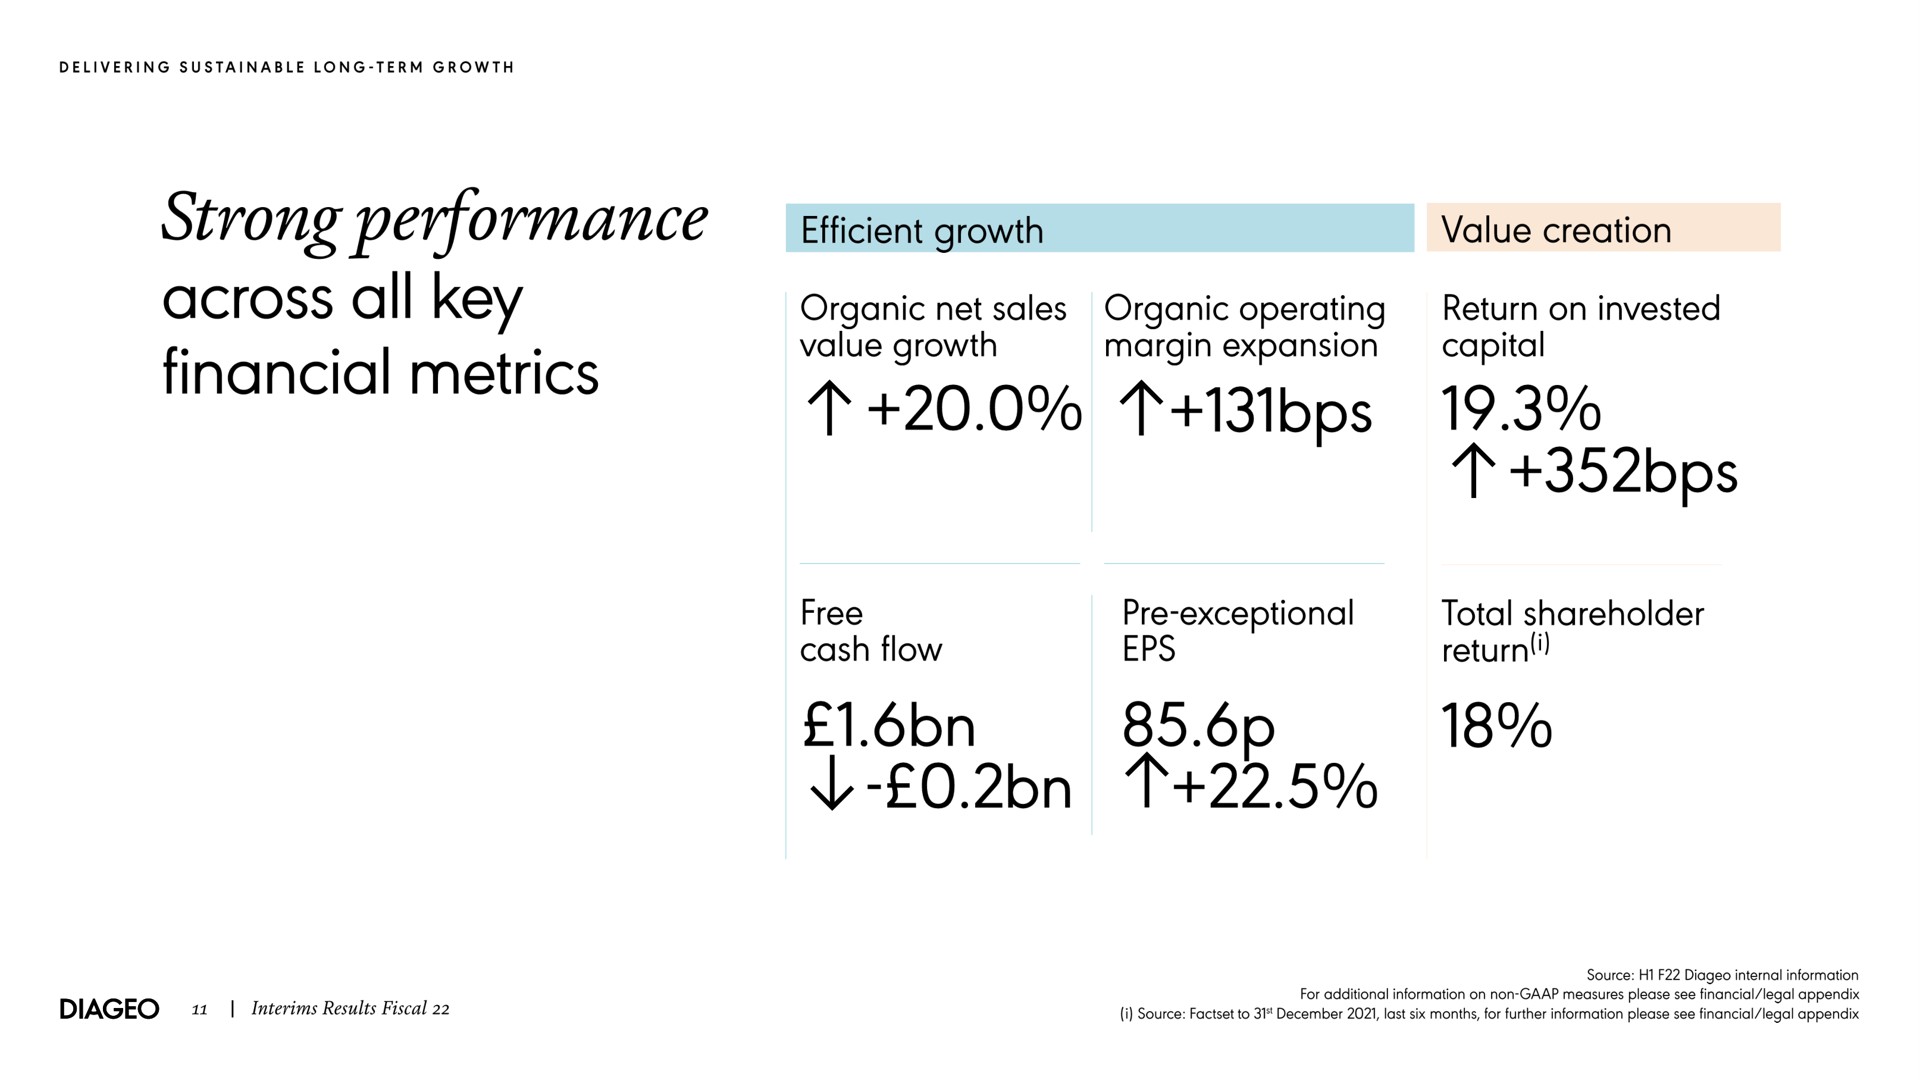 strong performance across all key financial metrics efficient growth organic net sales value growth organic operating margin expansion capital free cash flow exceptional total shareholder return | Diageo